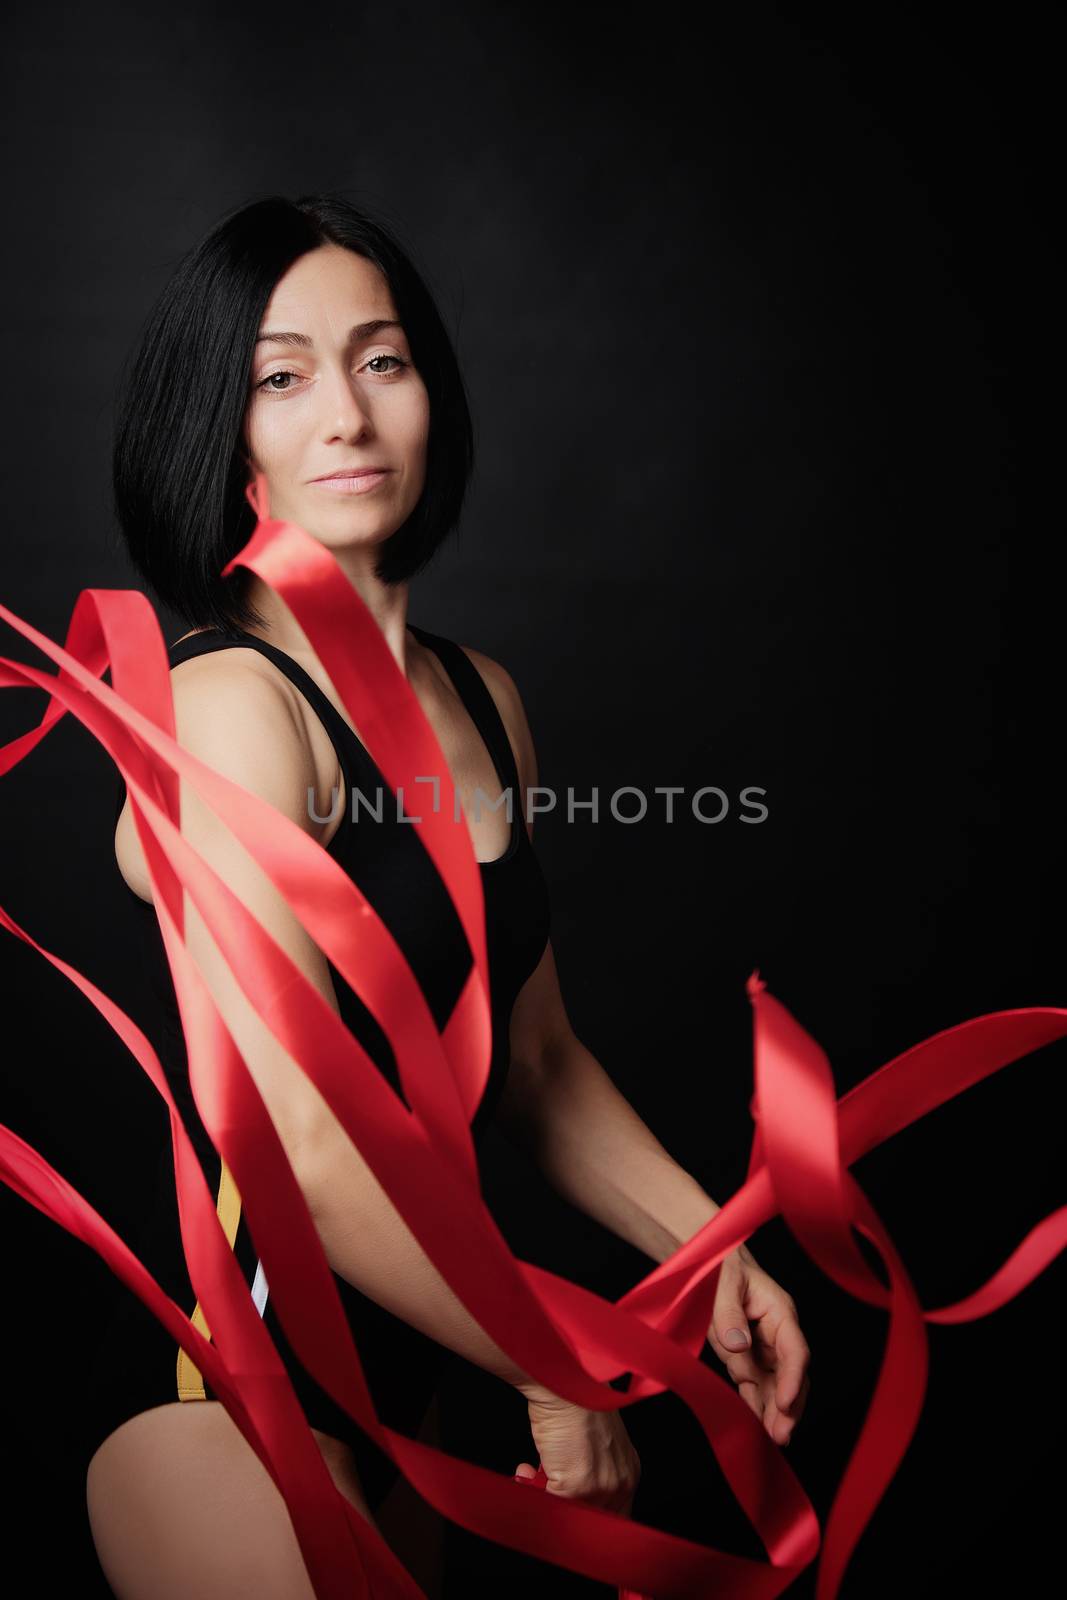 young woman gymnast of Caucasian appearance with black hair spins red satin ribbons, gymnastic exercises on black background, selective focus